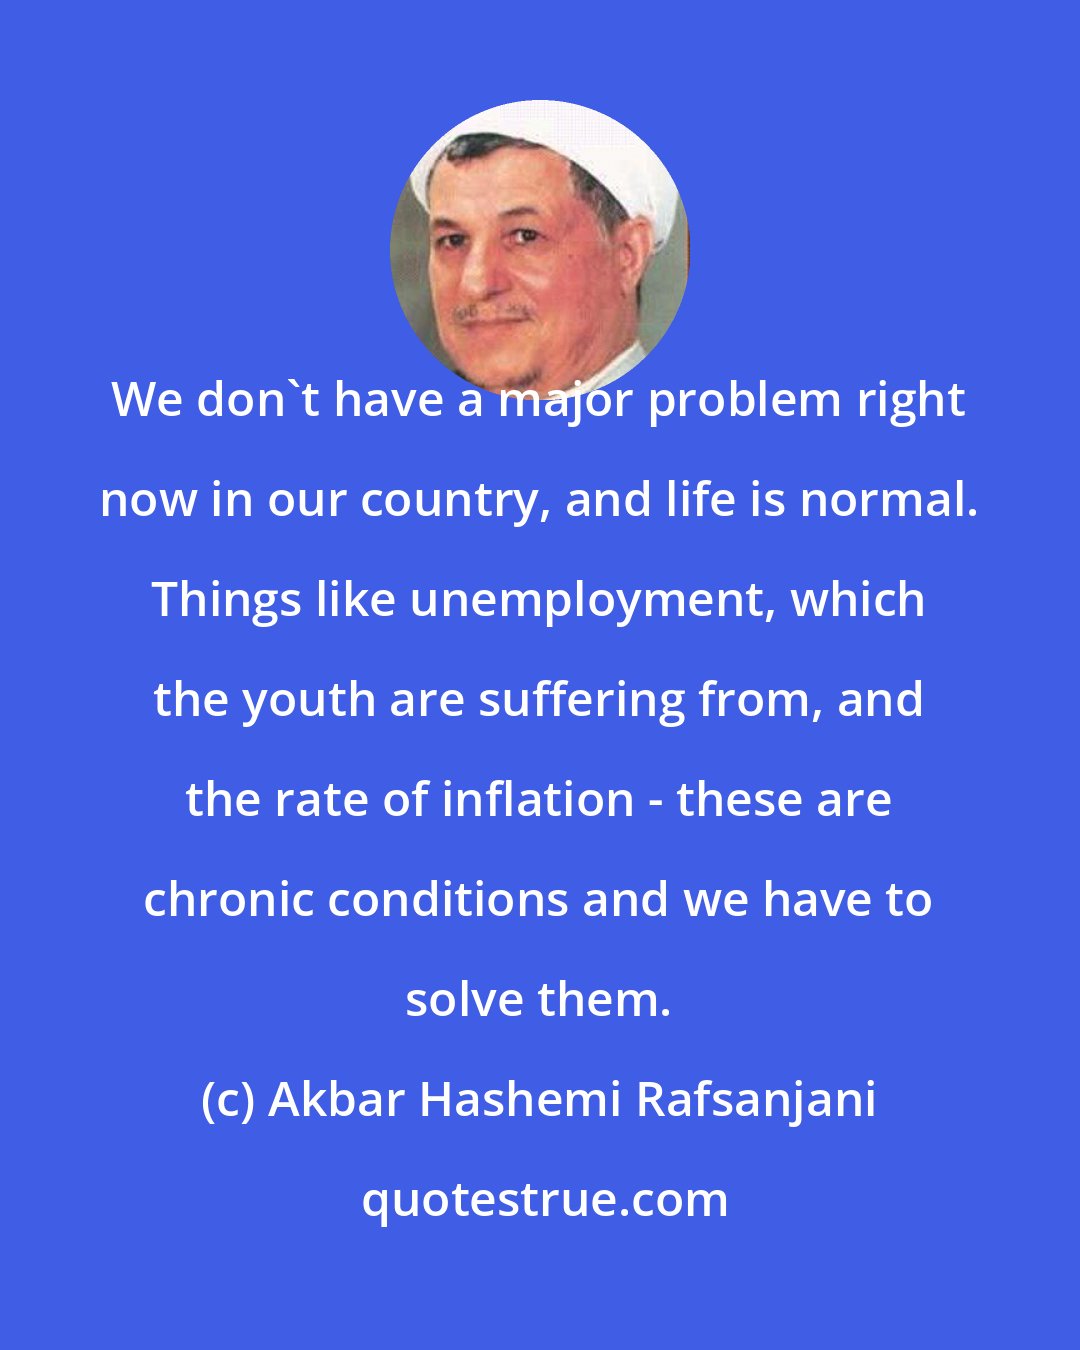 Akbar Hashemi Rafsanjani: We don't have a major problem right now in our country, and life is normal. Things like unemployment, which the youth are suffering from, and the rate of inflation - these are chronic conditions and we have to solve them.